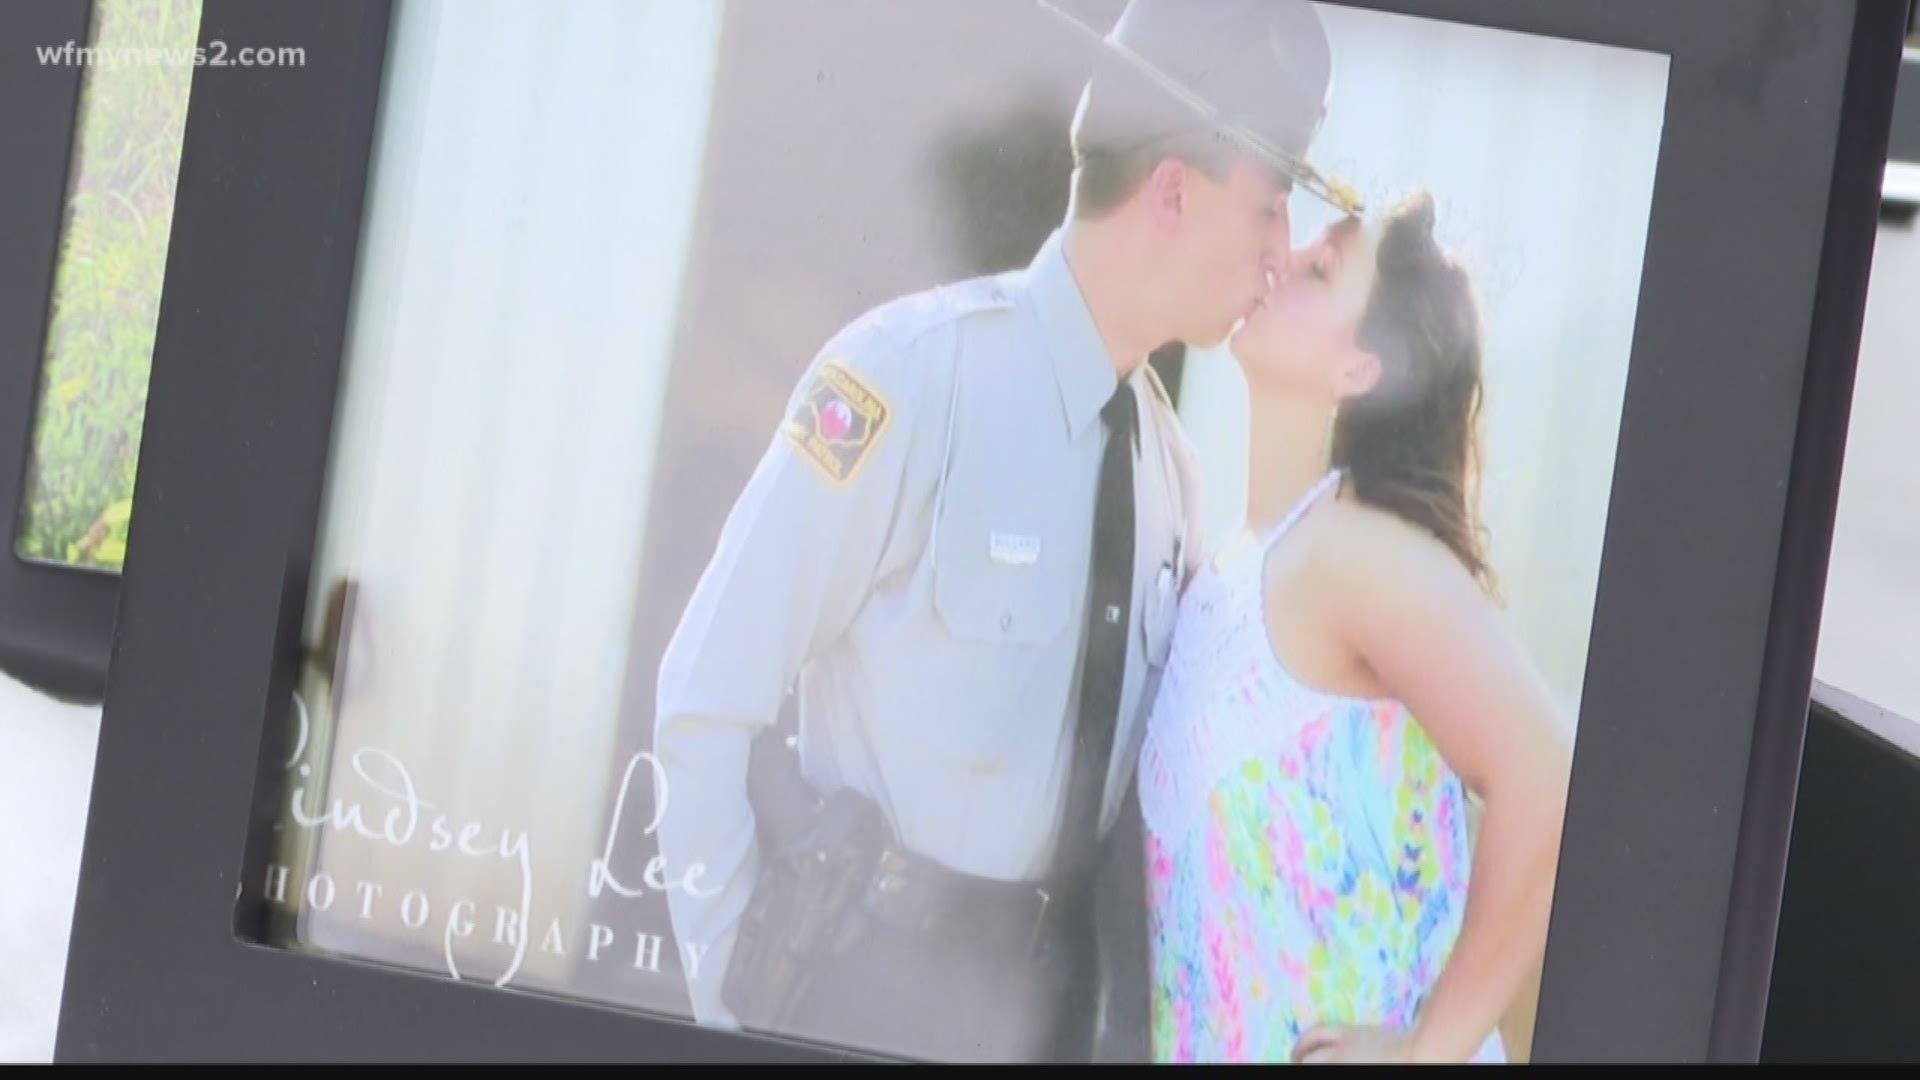 It was an emotional and rainy day, as the Surry County community came together to honor and remember NC State Trooper Samuel Bullard on his birthday.